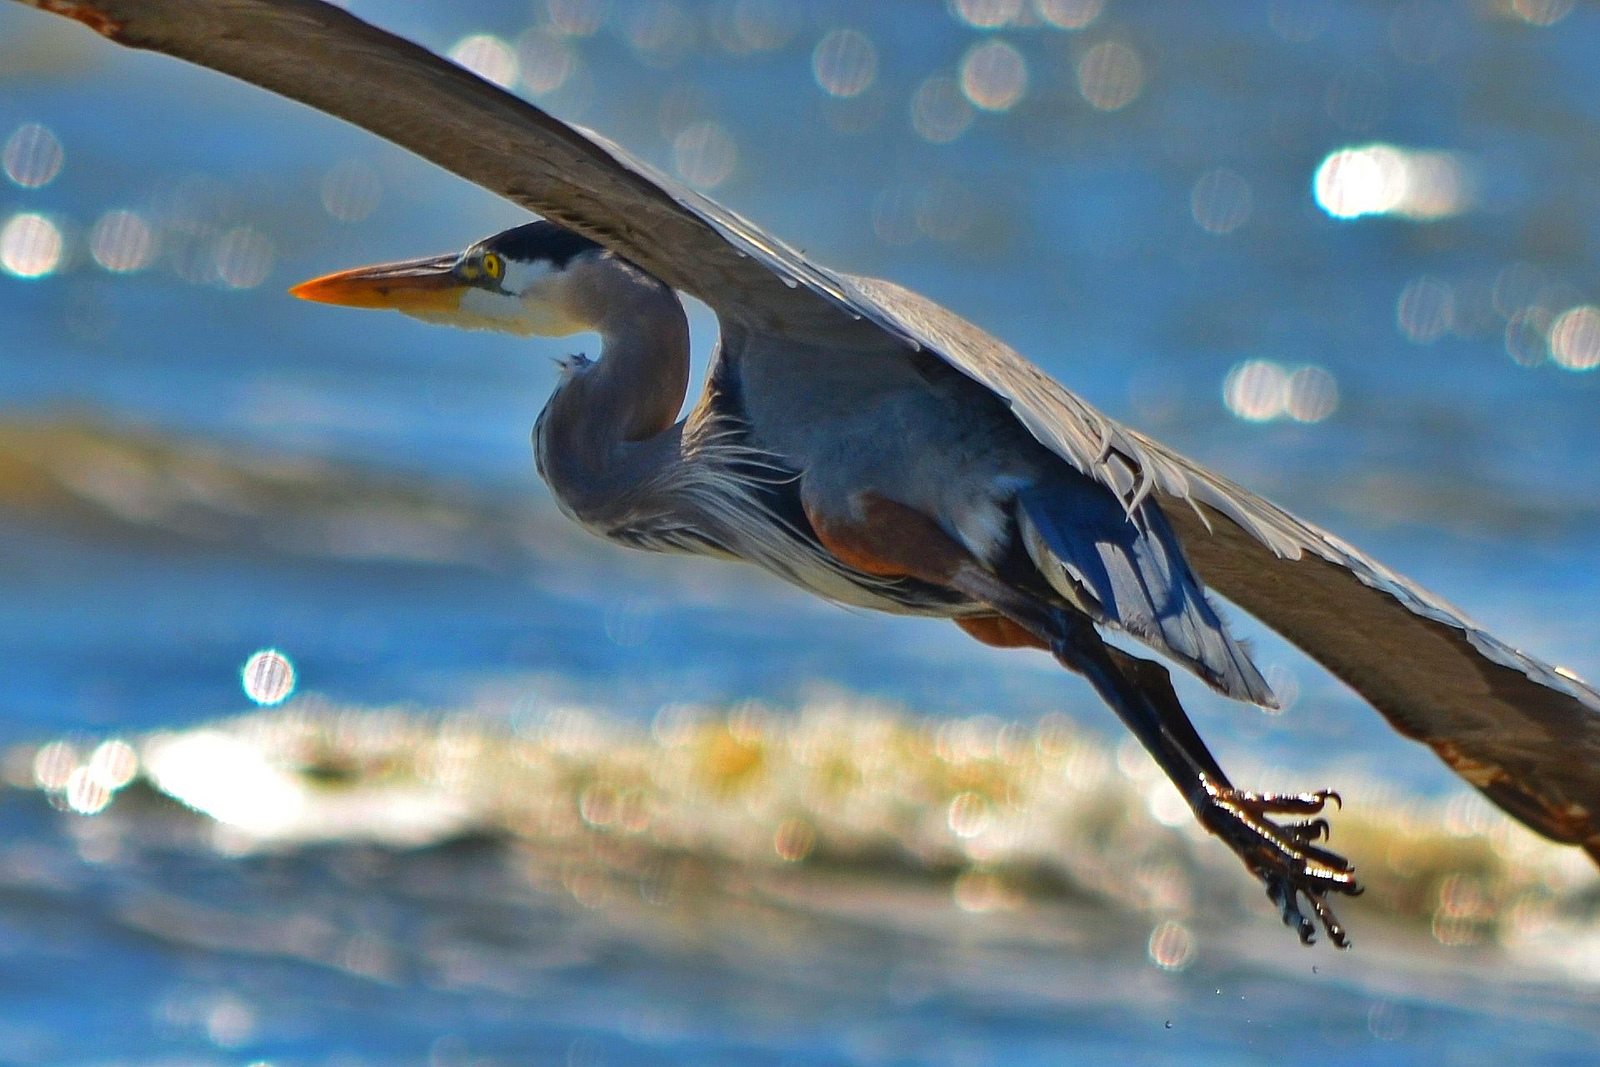 UPDATE: Syncrude Canada charged with 2015 blue heron deaths